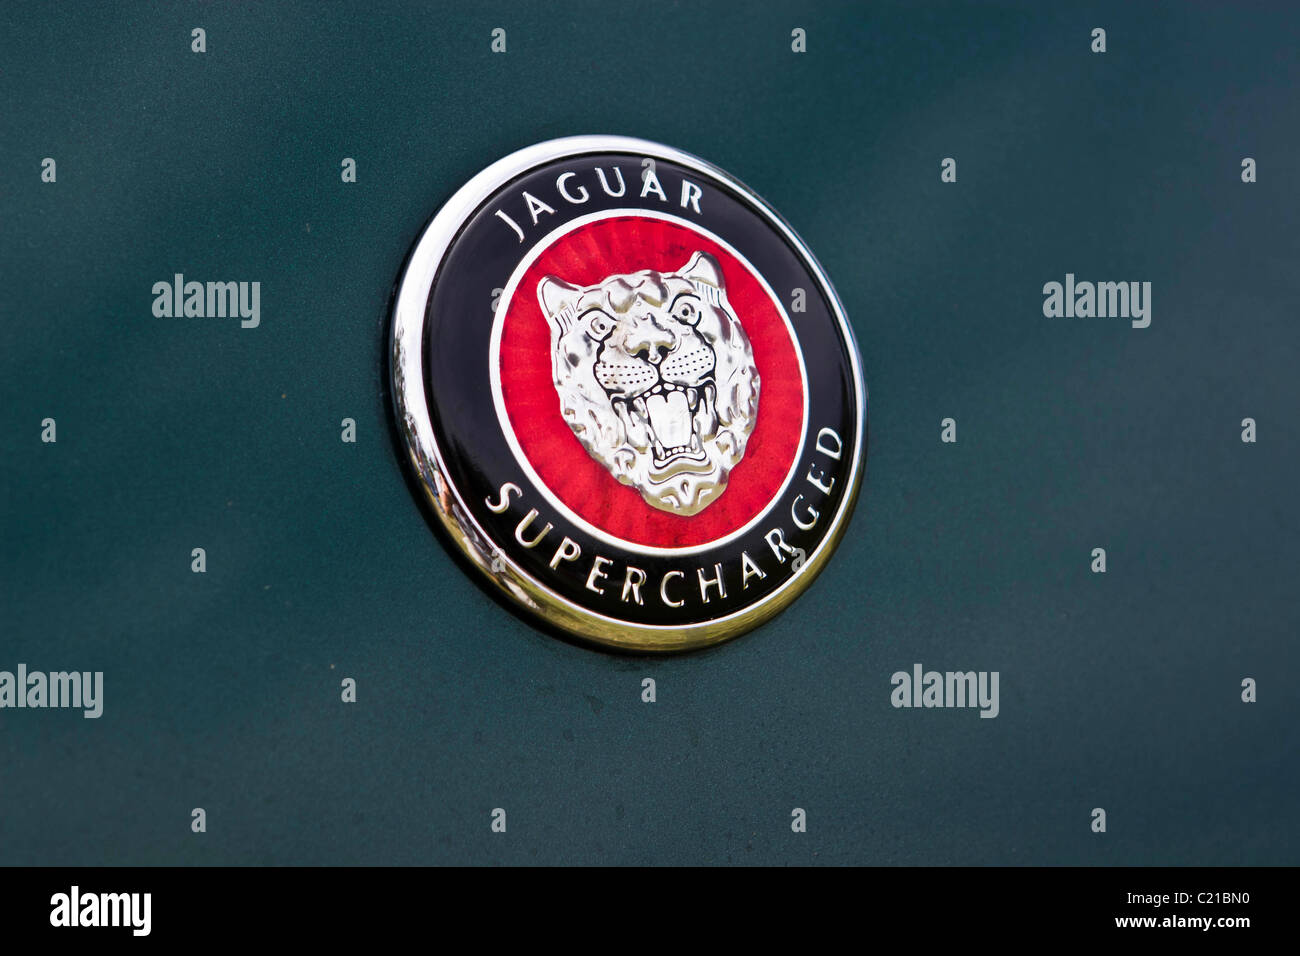 Badge from supercharged Jaguar car Stock Photo